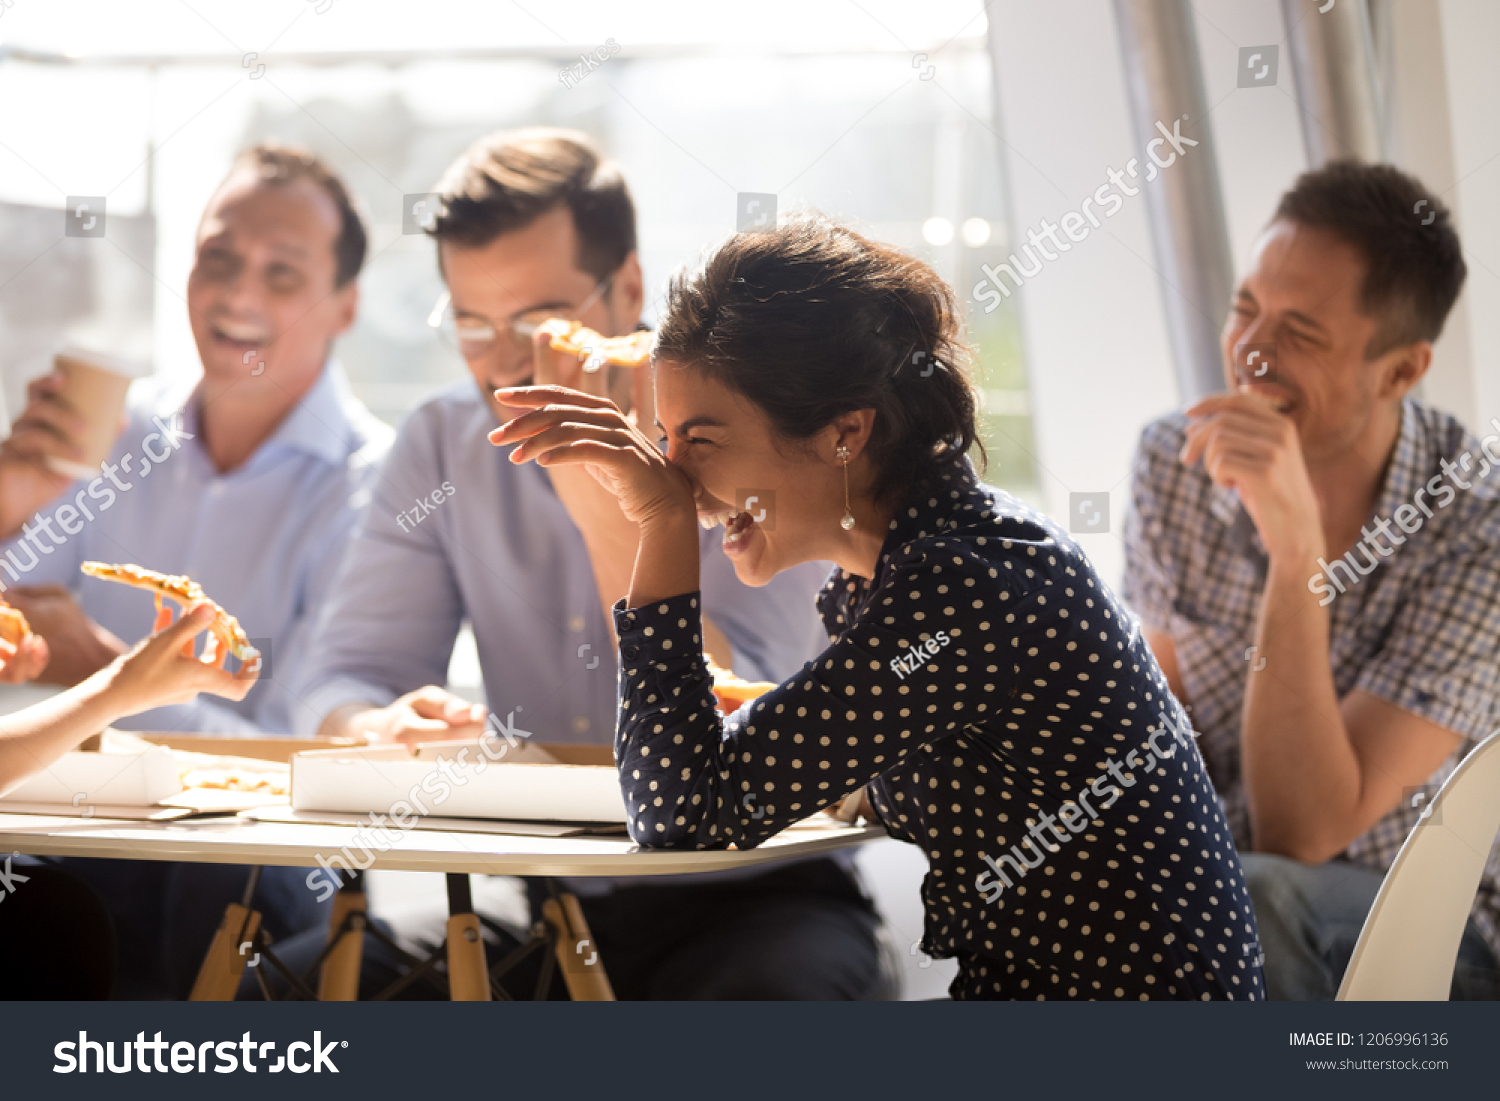 Indian woman laughing at funny joke eating pizza with diverse coworkers in office, friendly work team enjoying positive emotions and lunch together, happy colleagues staff group having fun at break #1206996136